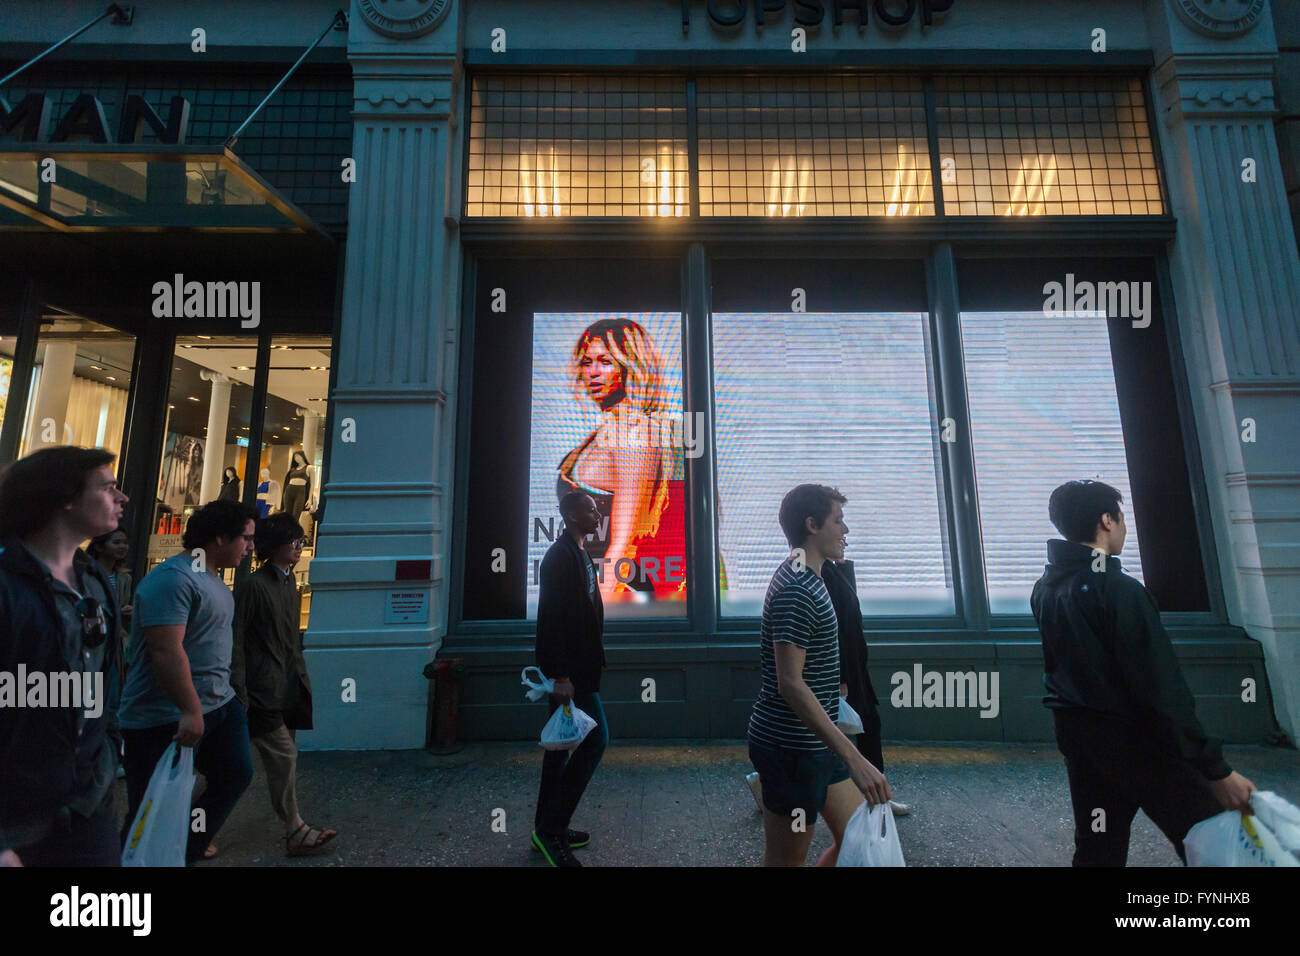 The Topshop Topman store in Soho in New York promotes Ivy Park, Beyoncé's line of athleisure wear, with a large window display containing an illuminated billboard showing a promotional video, seen on Tuesday, April 26, 2016. Residents of Soho and the Business Improvement District are complaining that the illuminated sign is not appropriate for the neighborhood. (© Richard B. Levine) Stock Photo